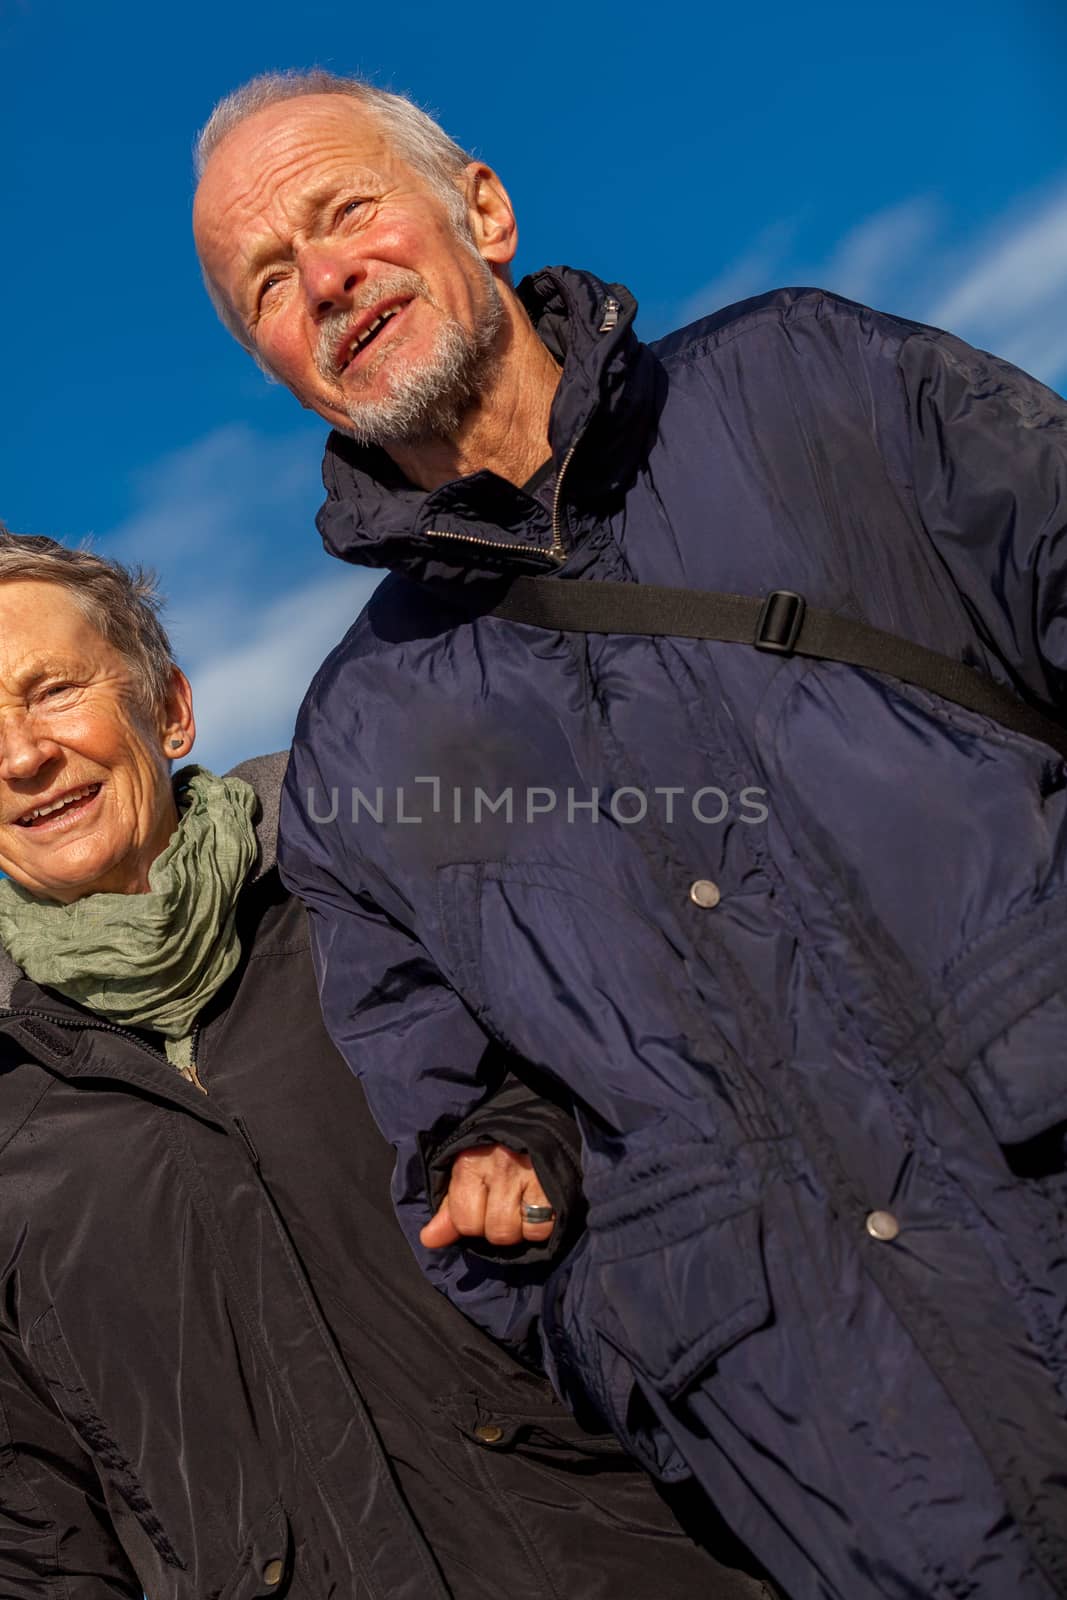 happy mature couple relaxing baltic sea dunes in autumn